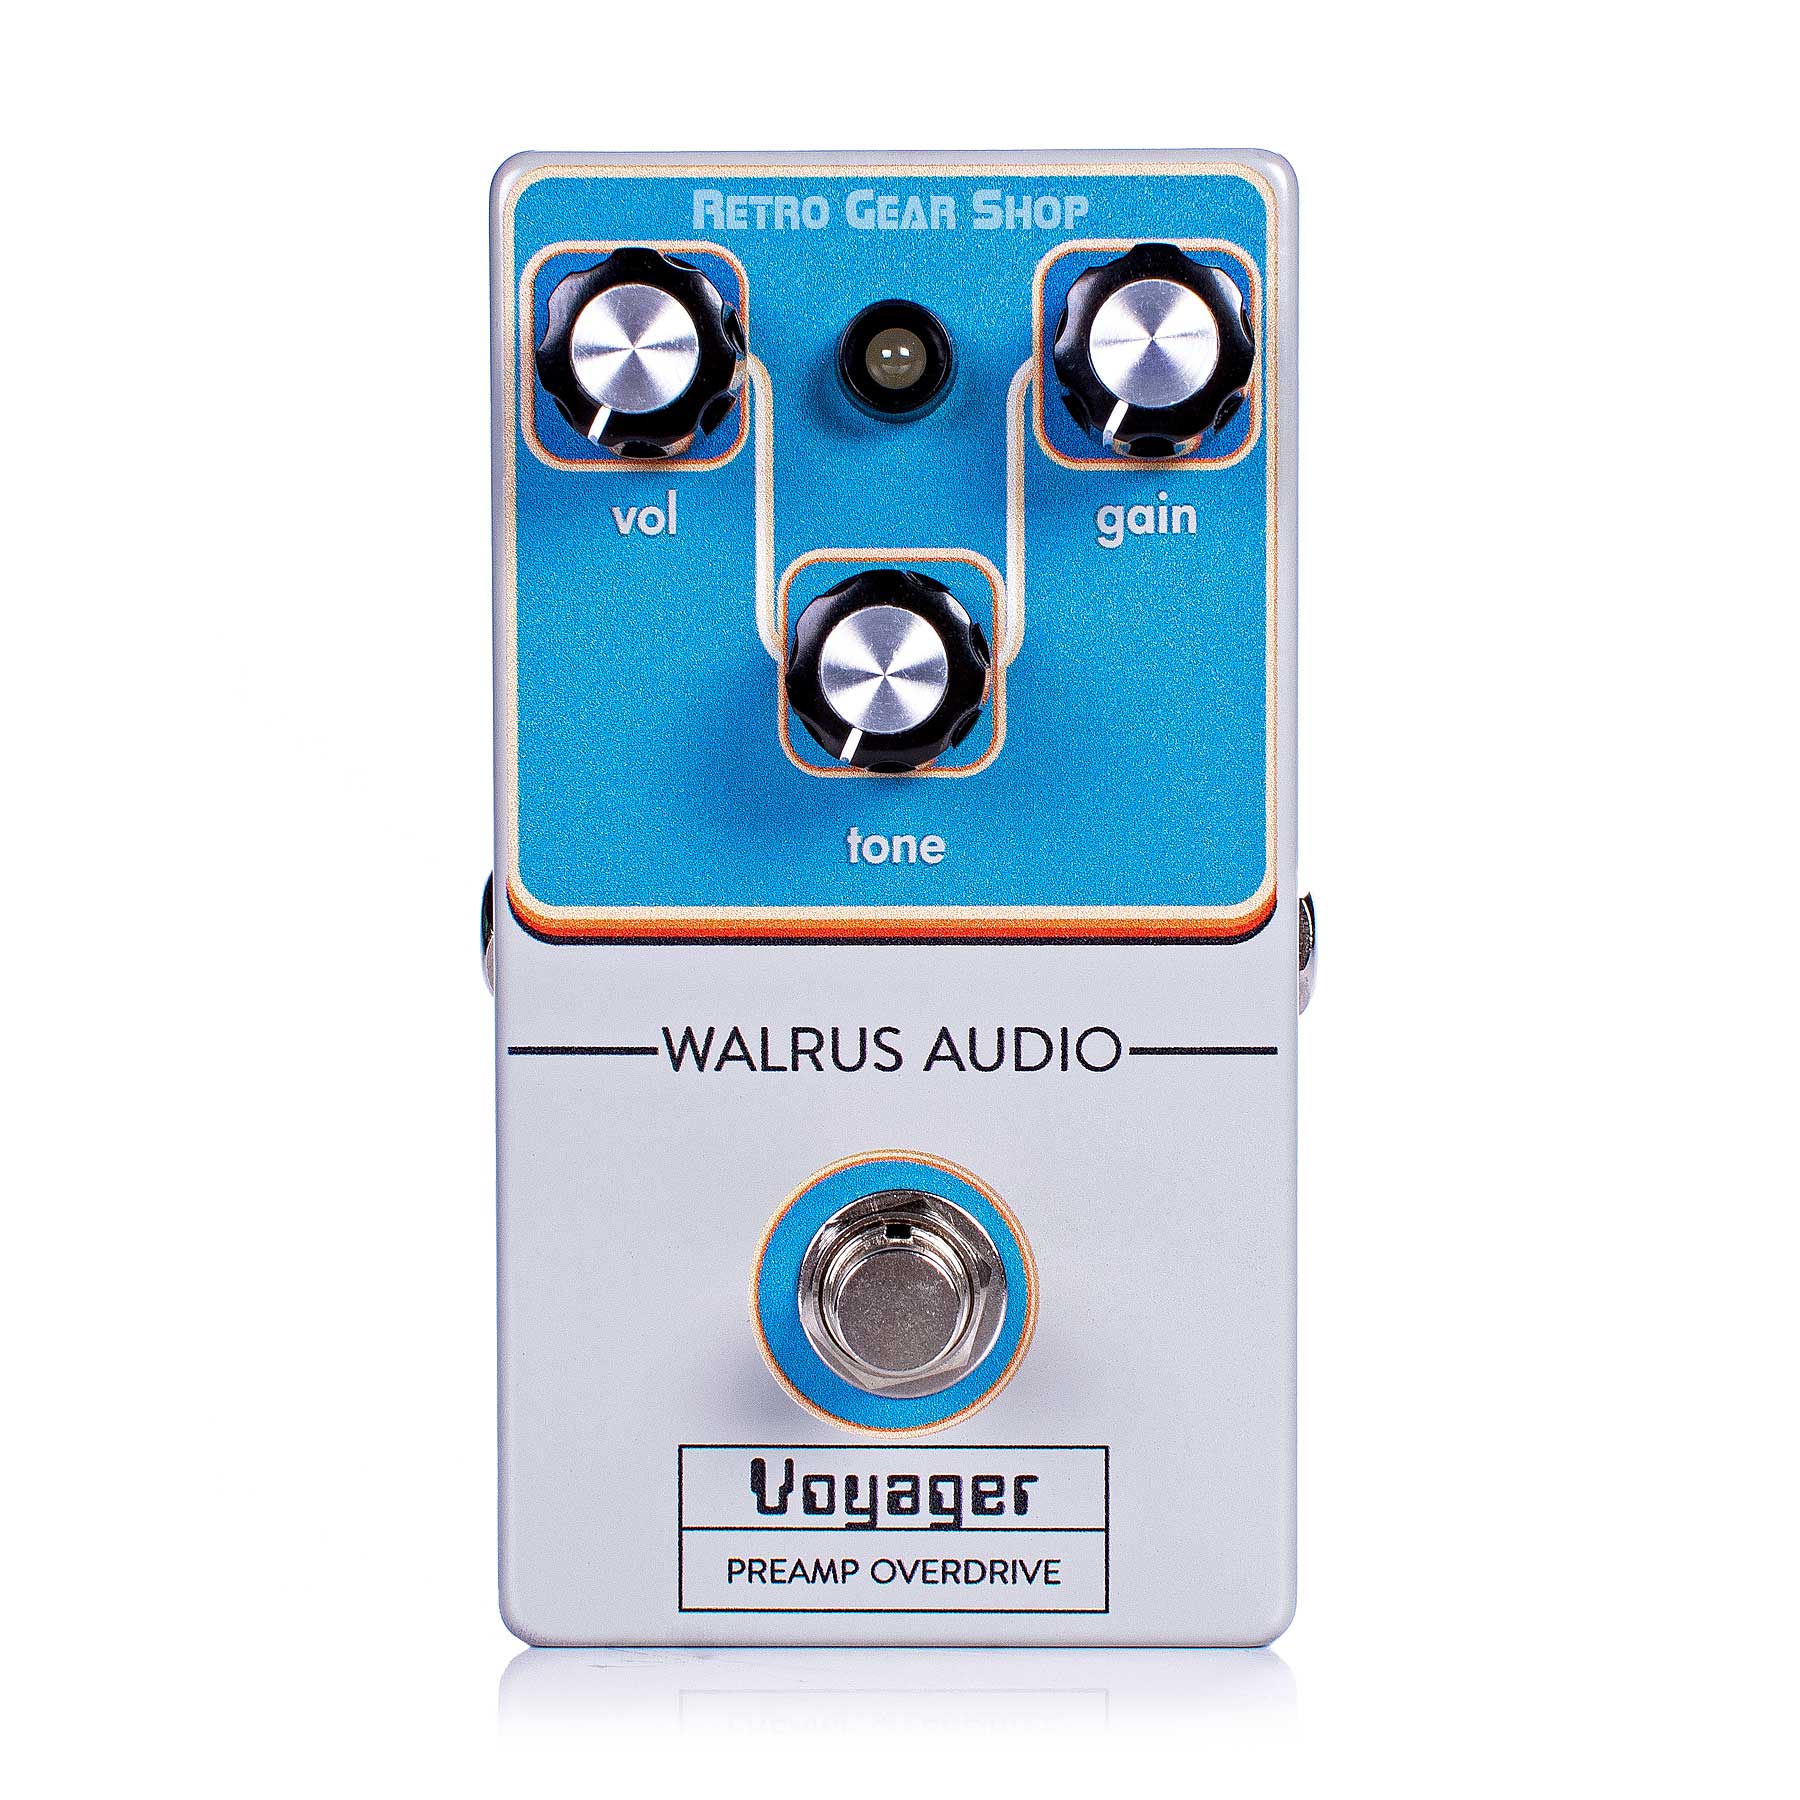 Walrus Audio Voyager Preamp Overdrive Custom Retro Limited Edition